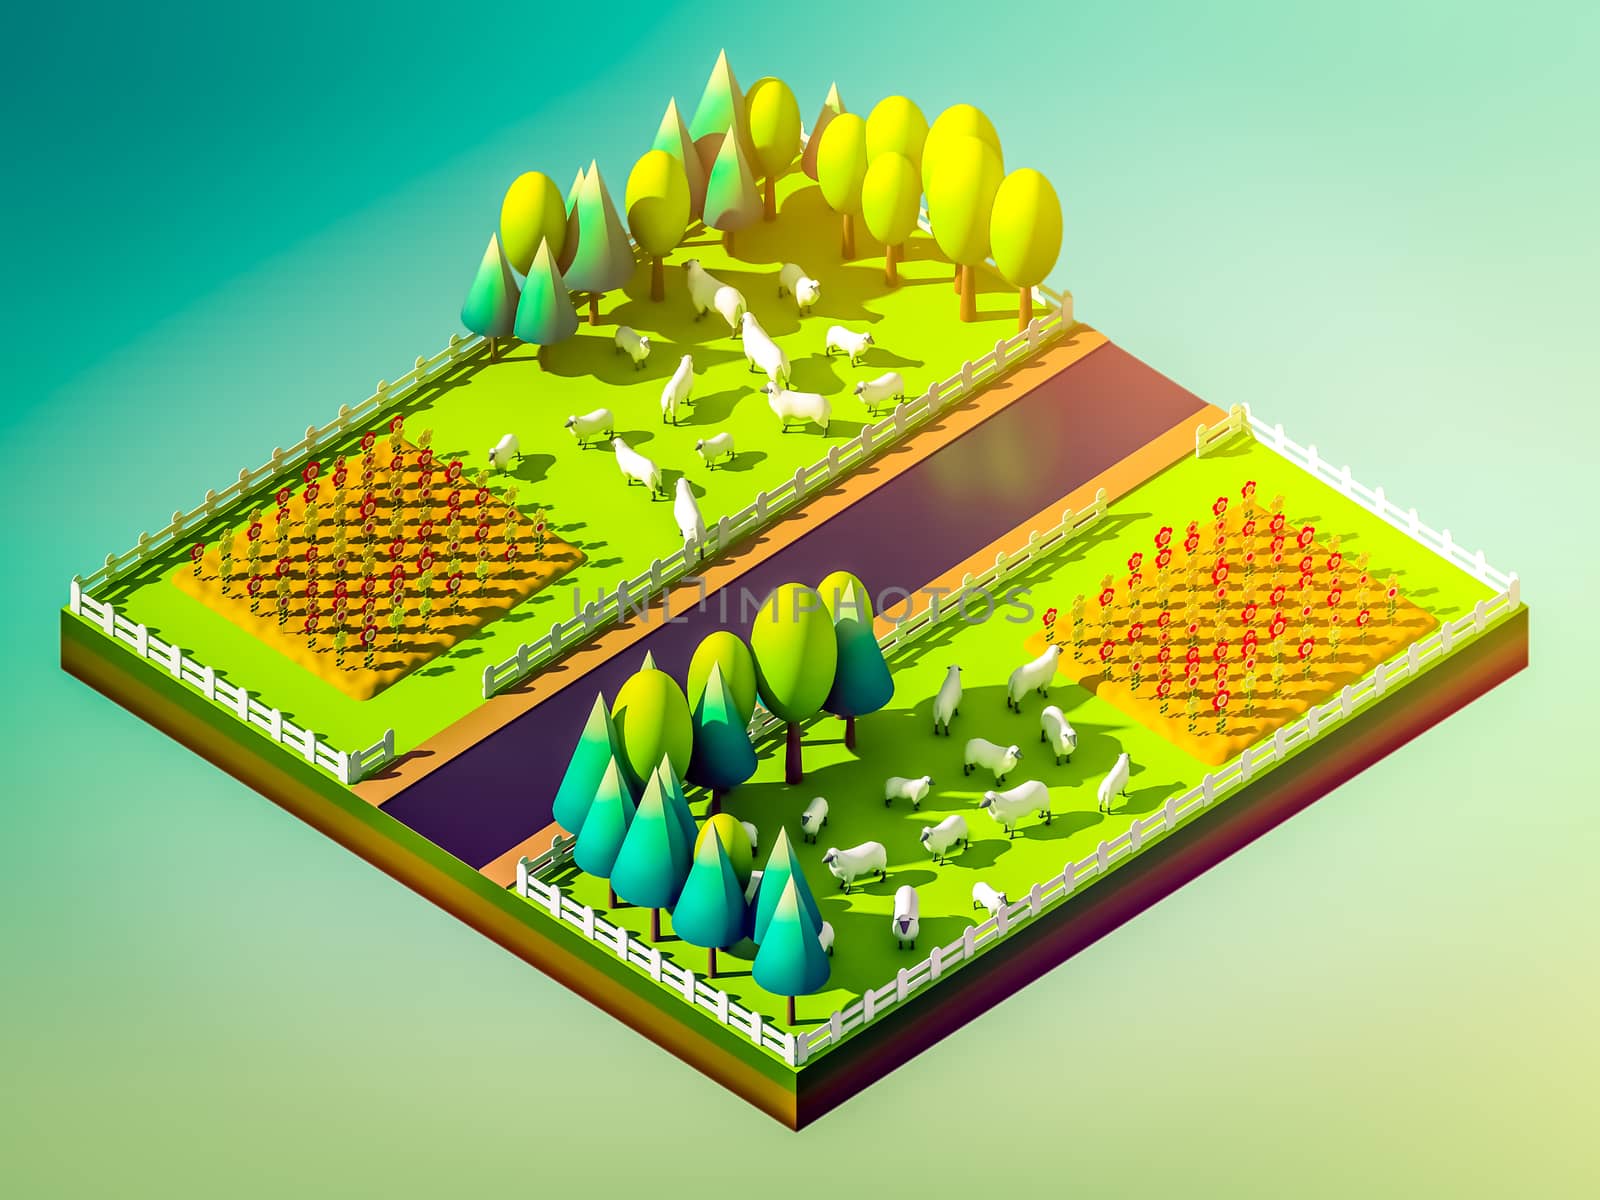 Sheep in the landscape, isometric view, isometric background